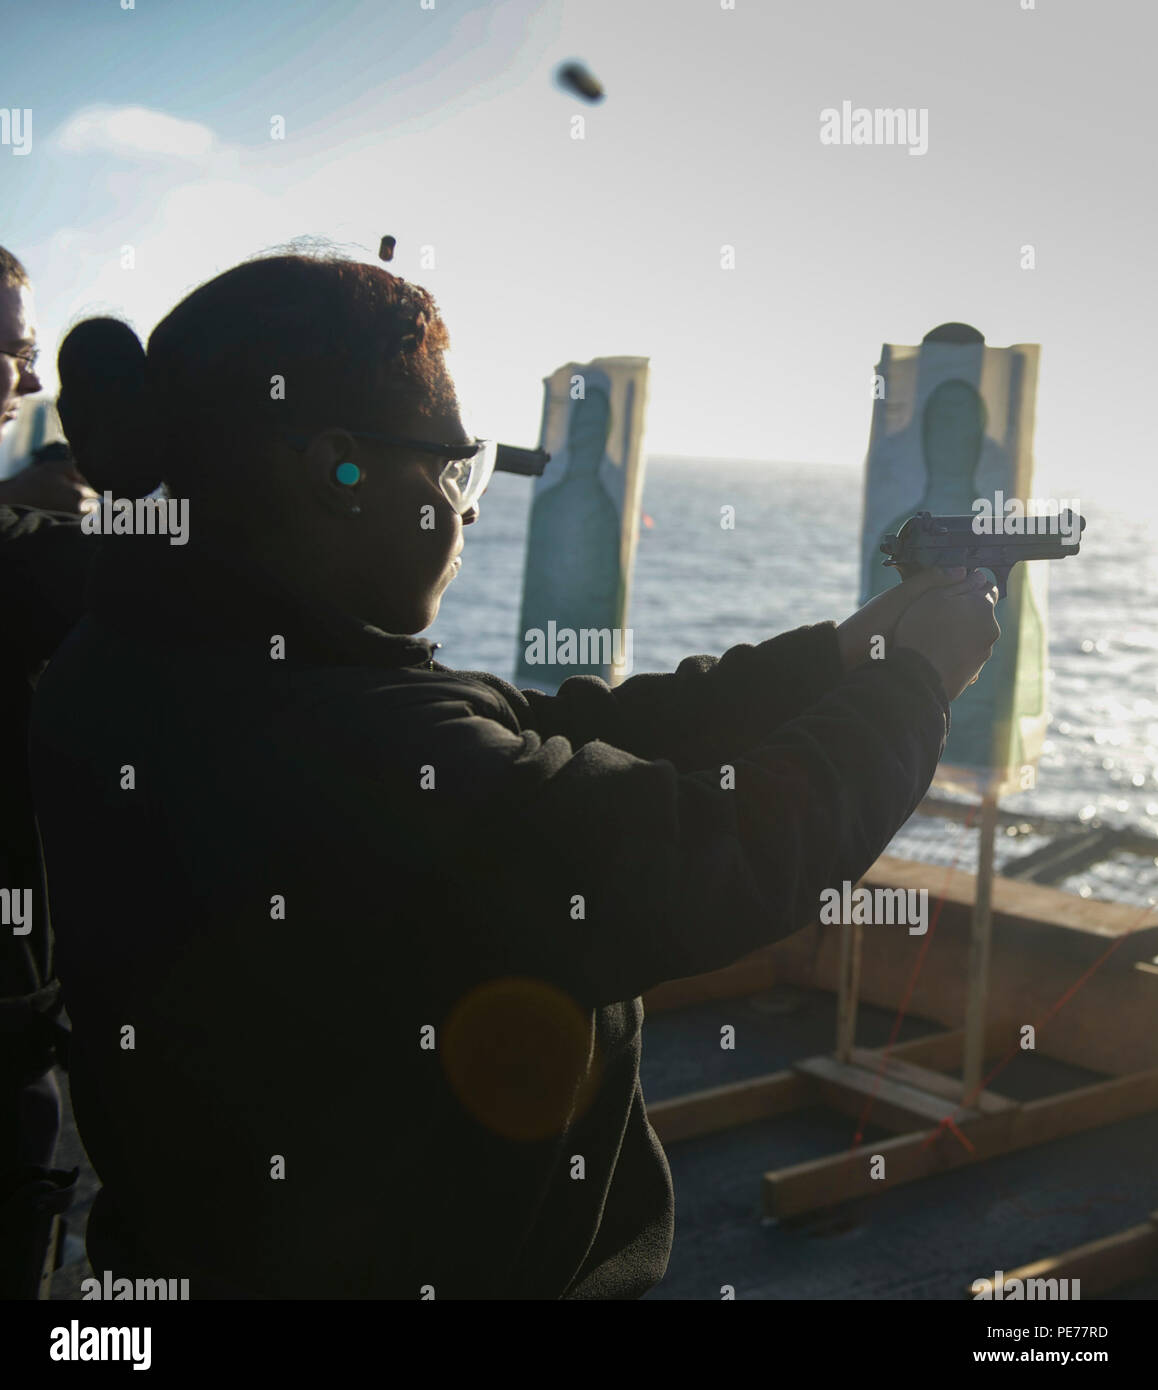 151026-N-GR718-230 PACIFIC OCEAN (Oct. 26, 2015) Boatswain’s Mate Seaman Elana Hunter fires a Beretta 9mm pistol during a live fire exercise on the flight deck of amphibious transport dock ship USS New Orleans (LPD 18). Boxer Amphibious Ready Group (ARG), composed of New Orleans, amphibious assault ship USS Boxer (LHD 4), dock landing ship USS Harpers Ferry (LSD 49), and the 13th Marine Expeditionary Unit, is conducting a Composite Training Unit Exercise (COMPTUEX) to test their ability to effectively respond to scenario driven events and perform as an integrated unit in preparation for deploy Stock Photo